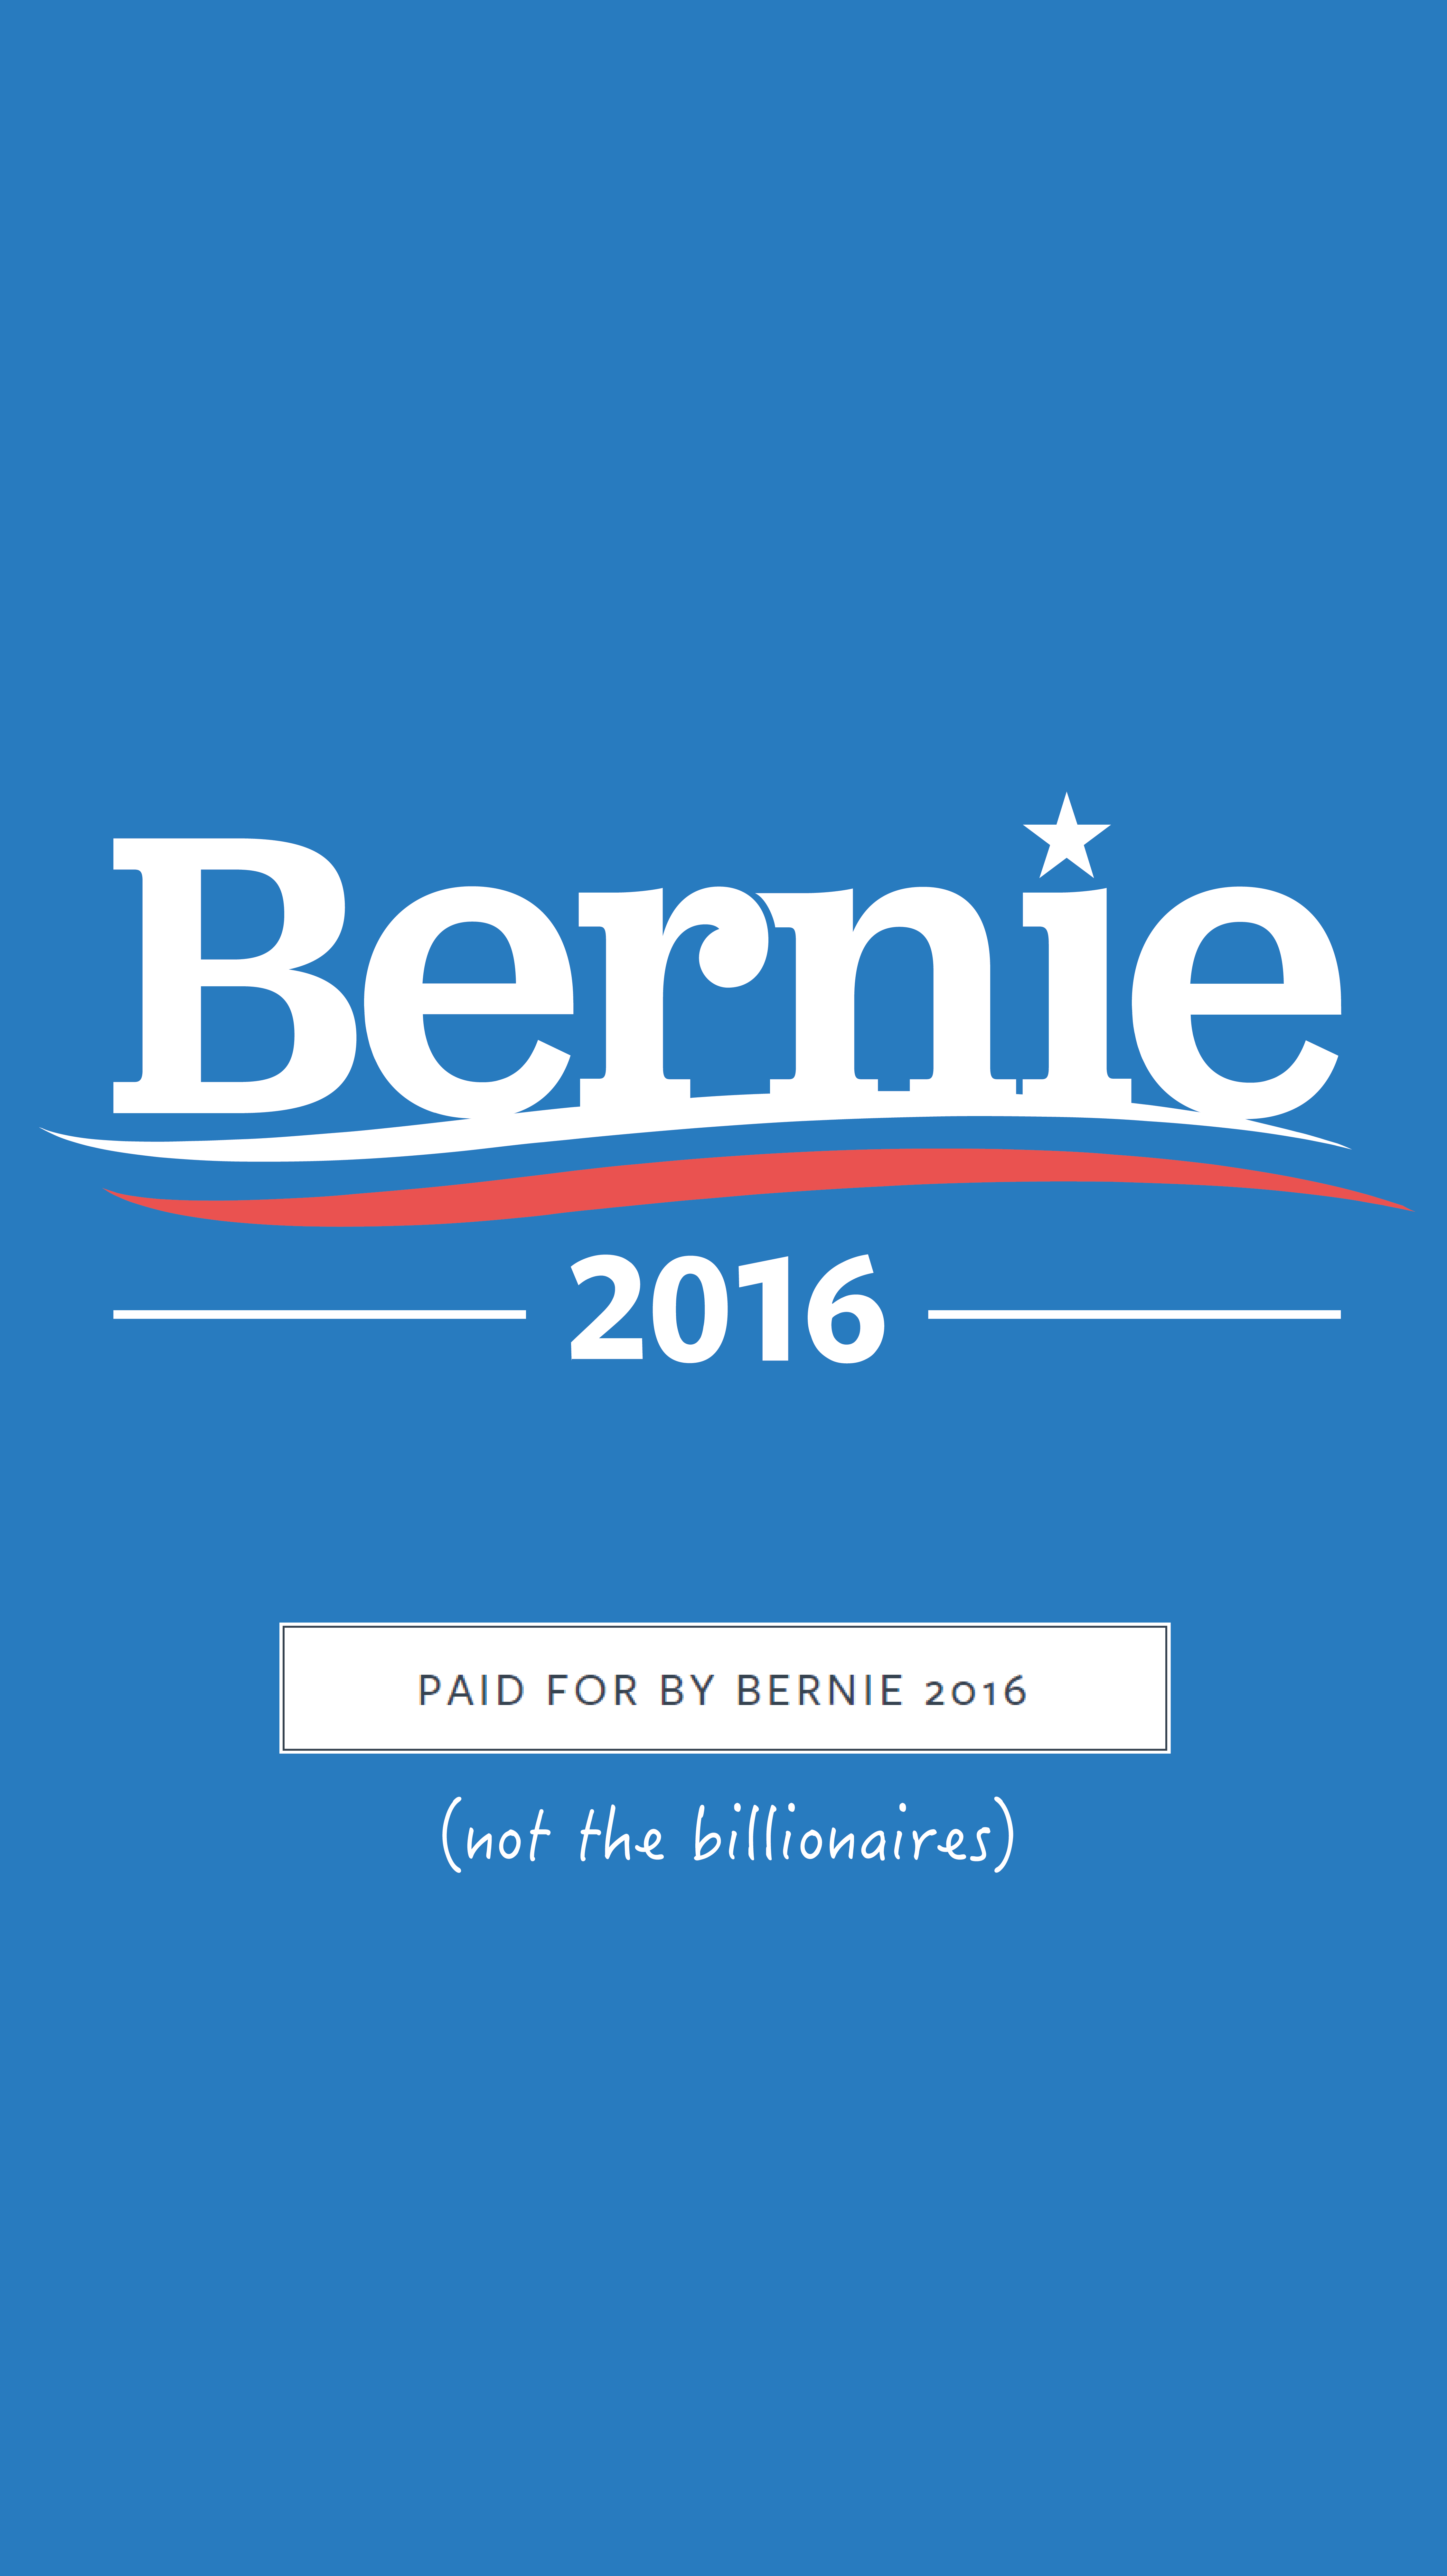 Support Bernie With These Smartphone Wallpaper! several